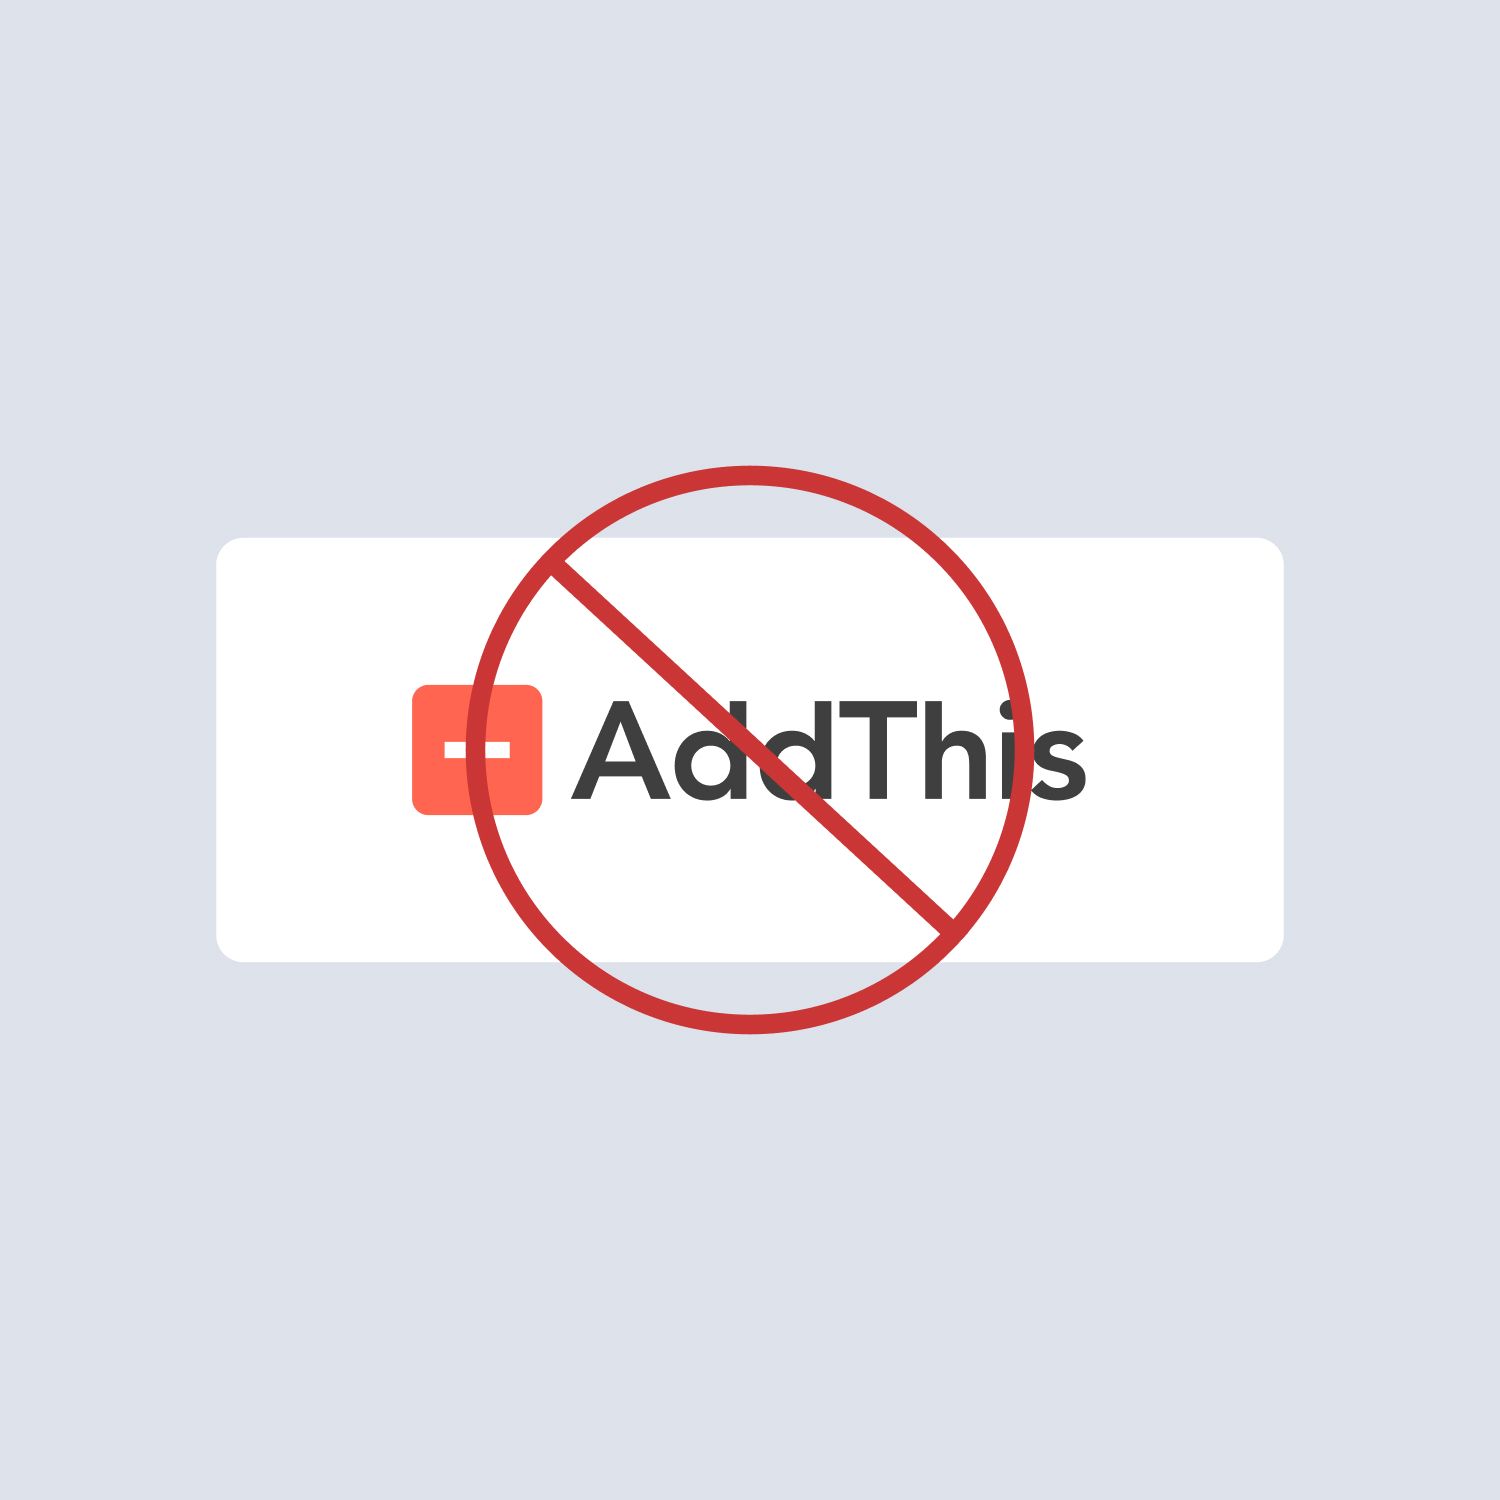 AddThis is terminating its services